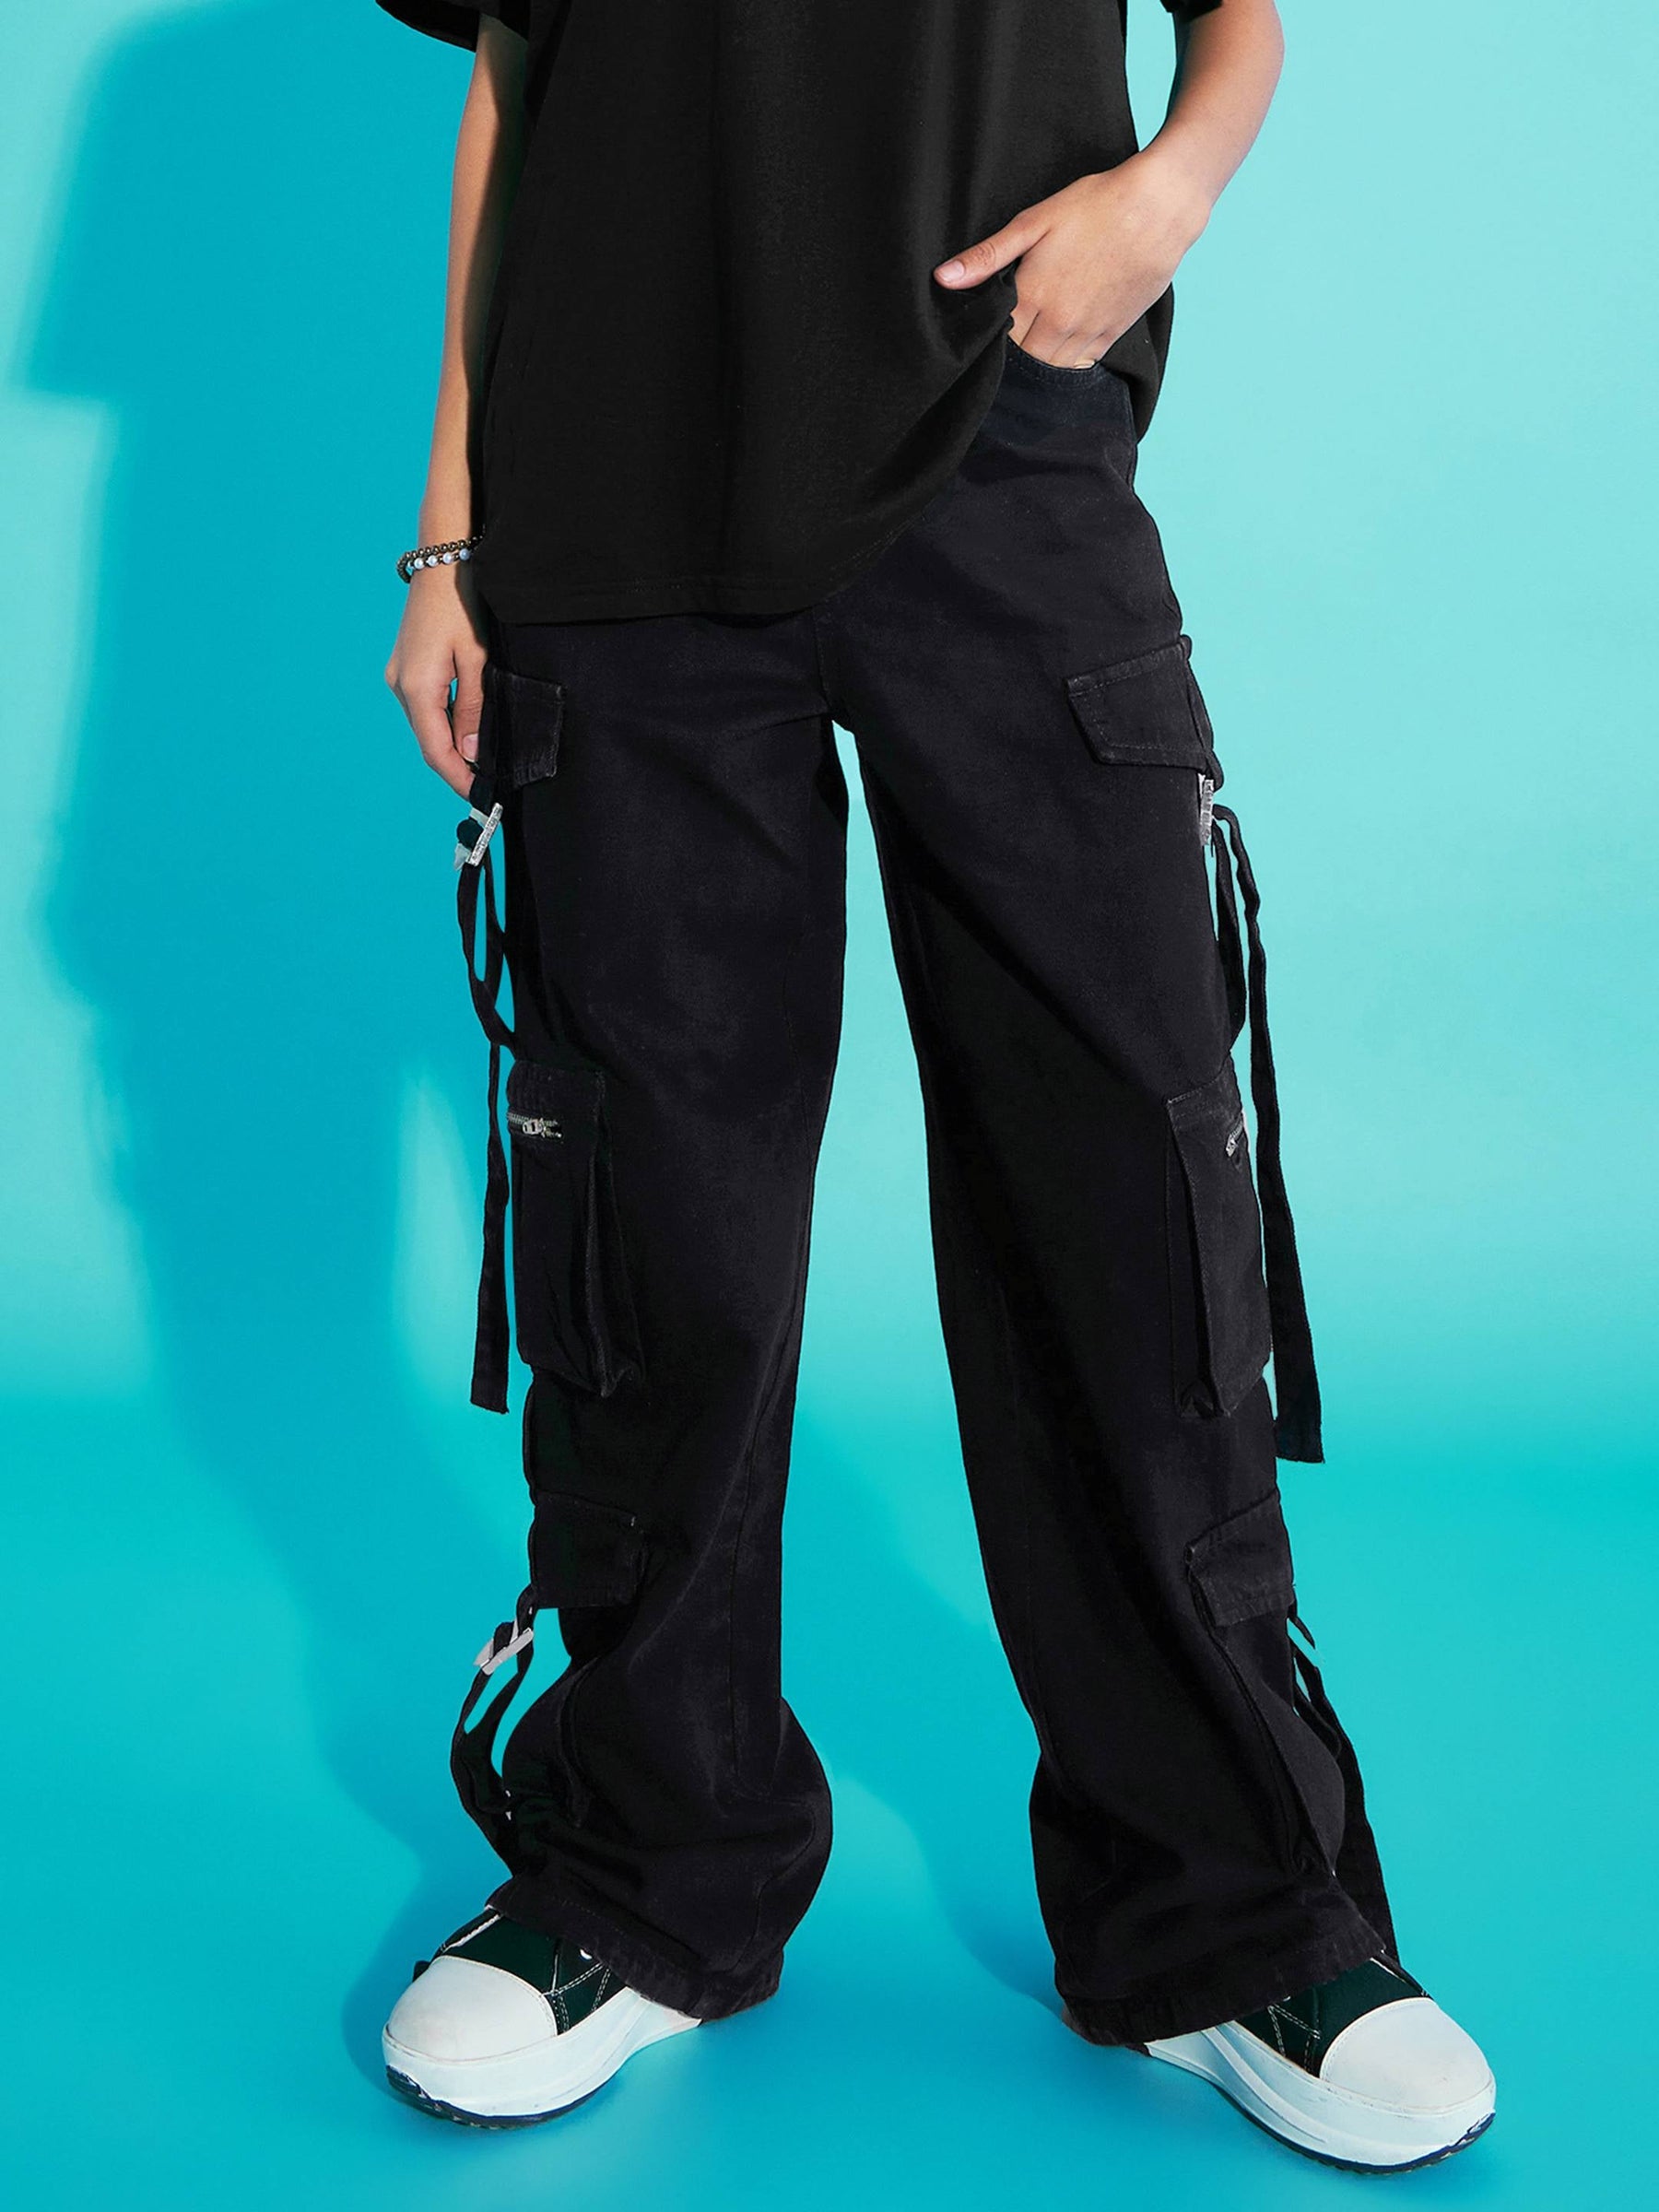 Buy The Souled Store Solids: Black Women and Girls Loose fit Cotton and  Polyester Black Color Women Cargo Pants at Amazon.in